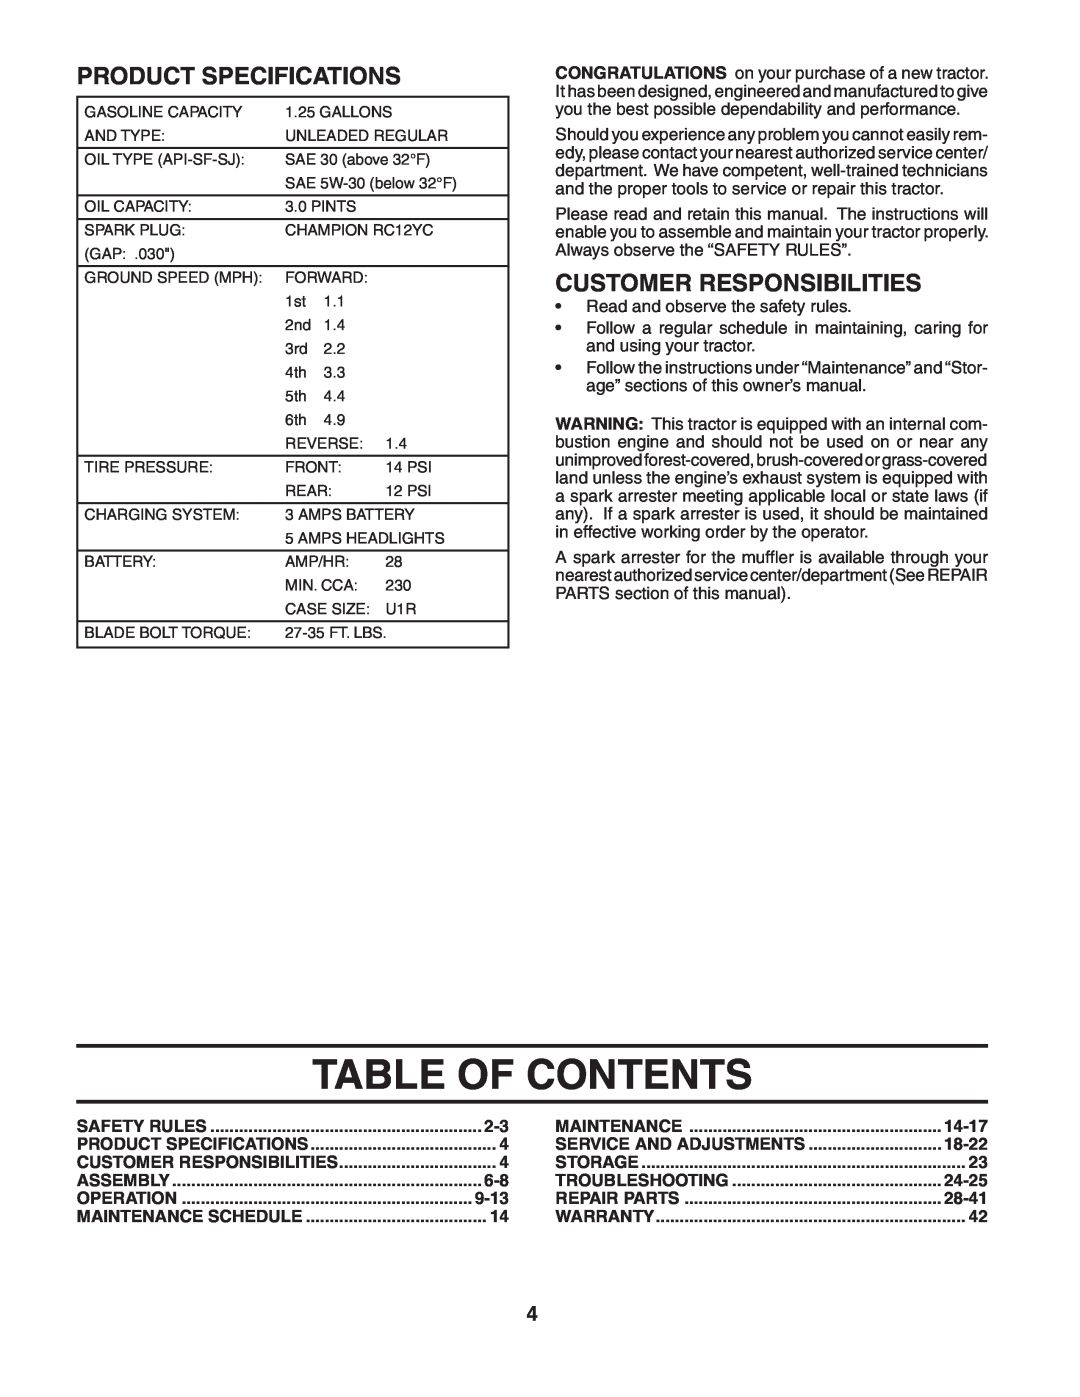 Poulan 188870 manual Table Of Contents, Product Specifications, Customer Responsibilities 